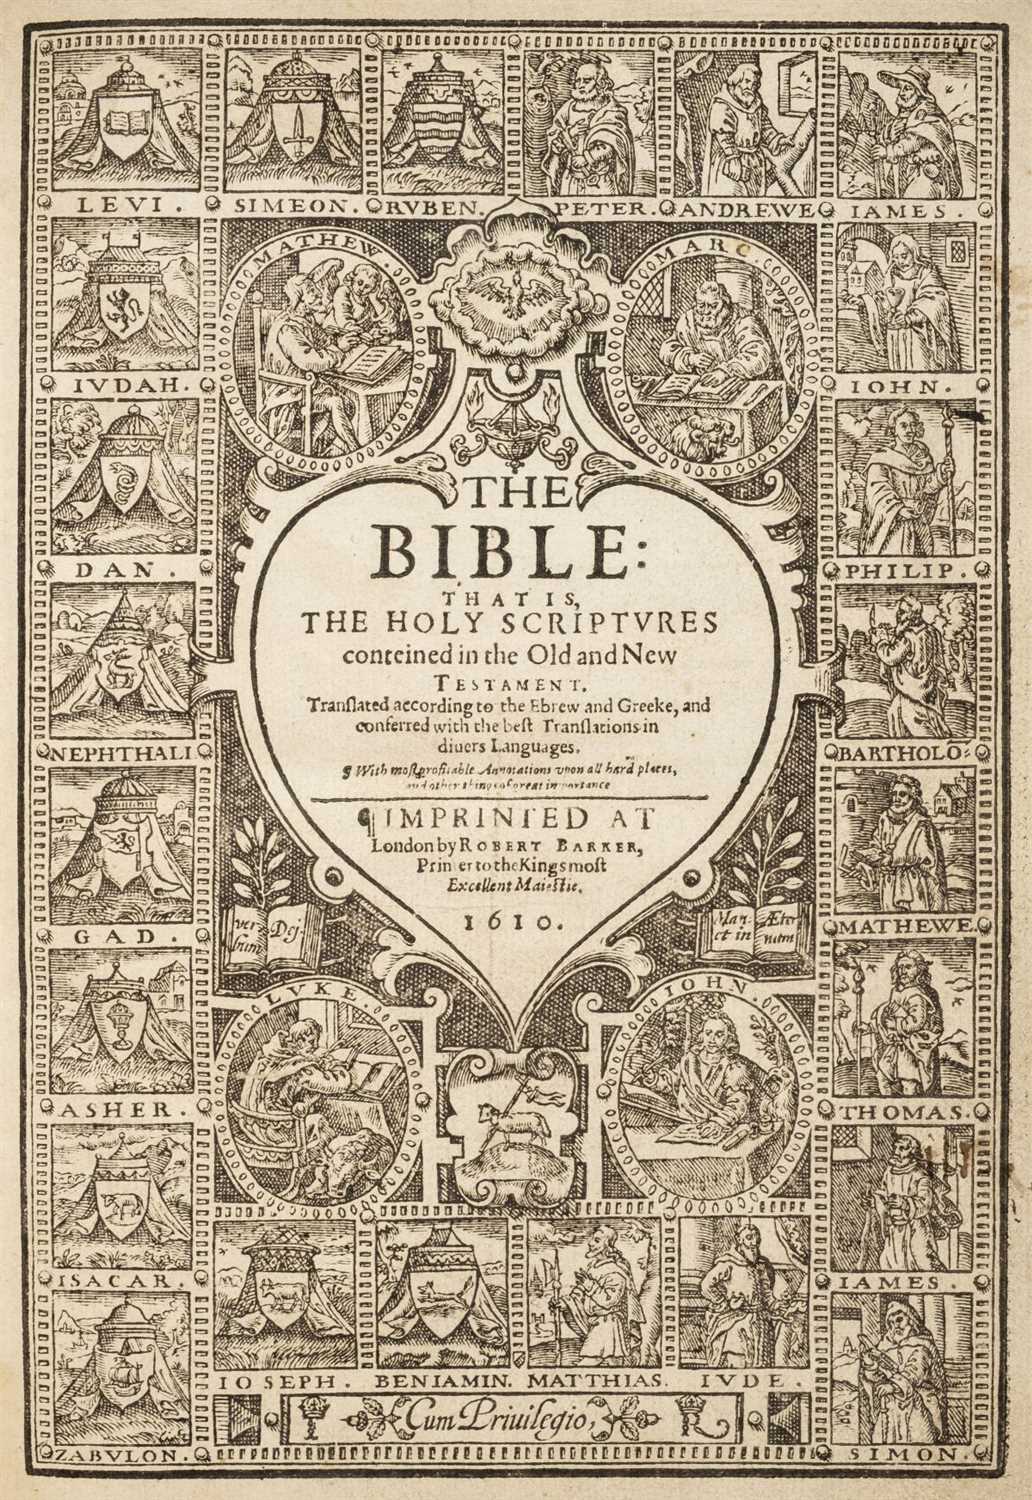 Lot 299 - Bible [English]. The Bible: That is the Holy Scriptures..., London: Robert Barker, 1610